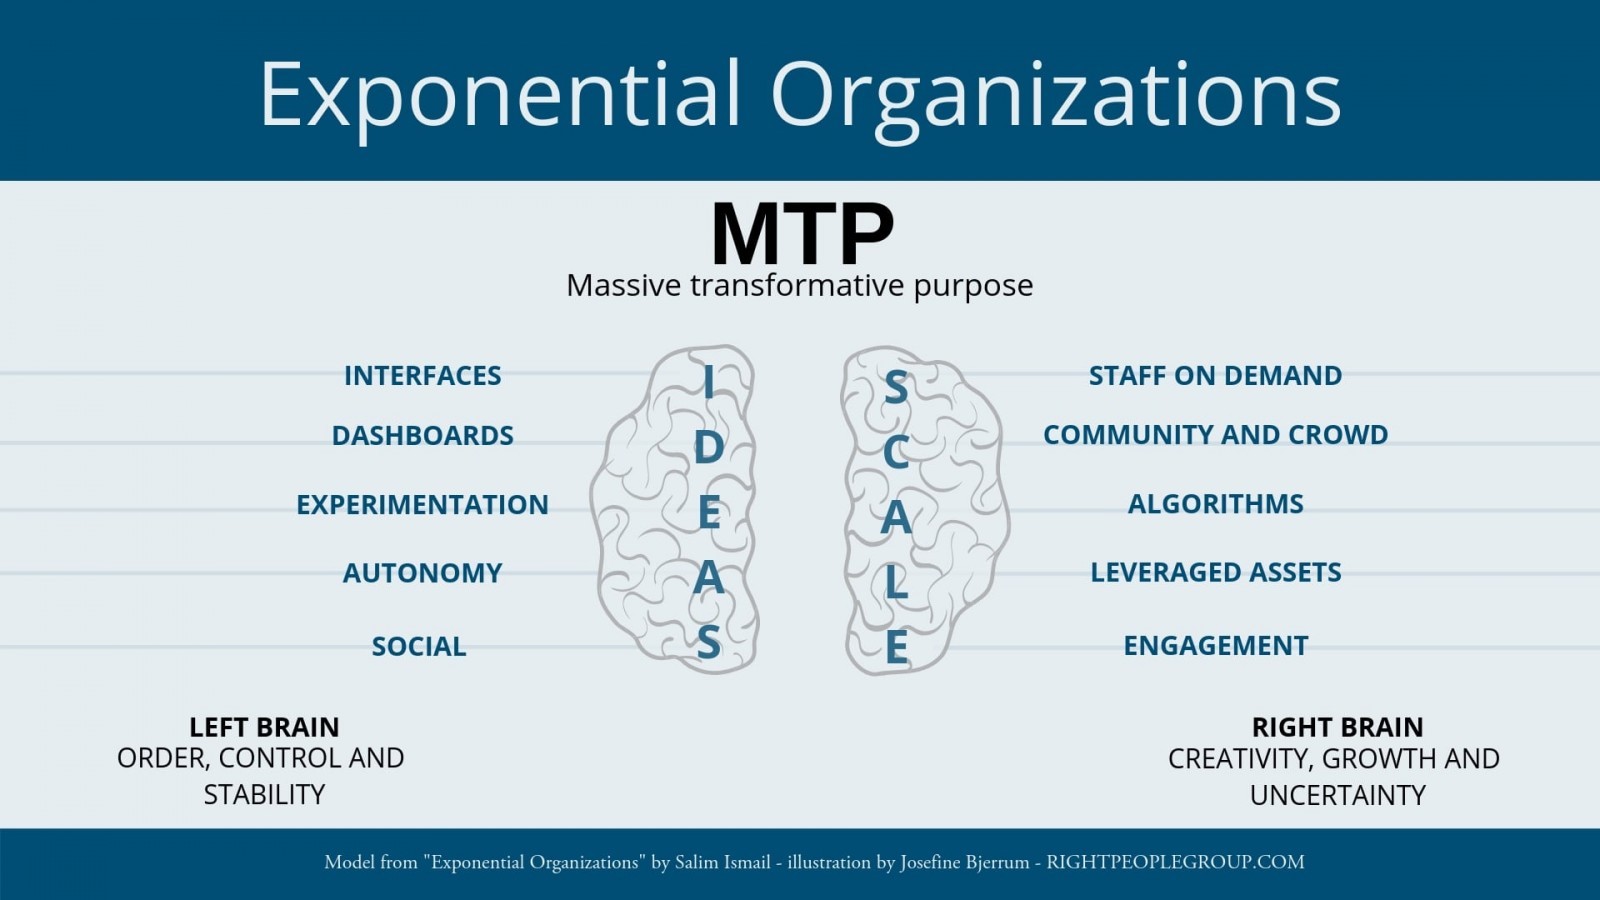 Exponential organizations scale and ideas by Salim Ismail